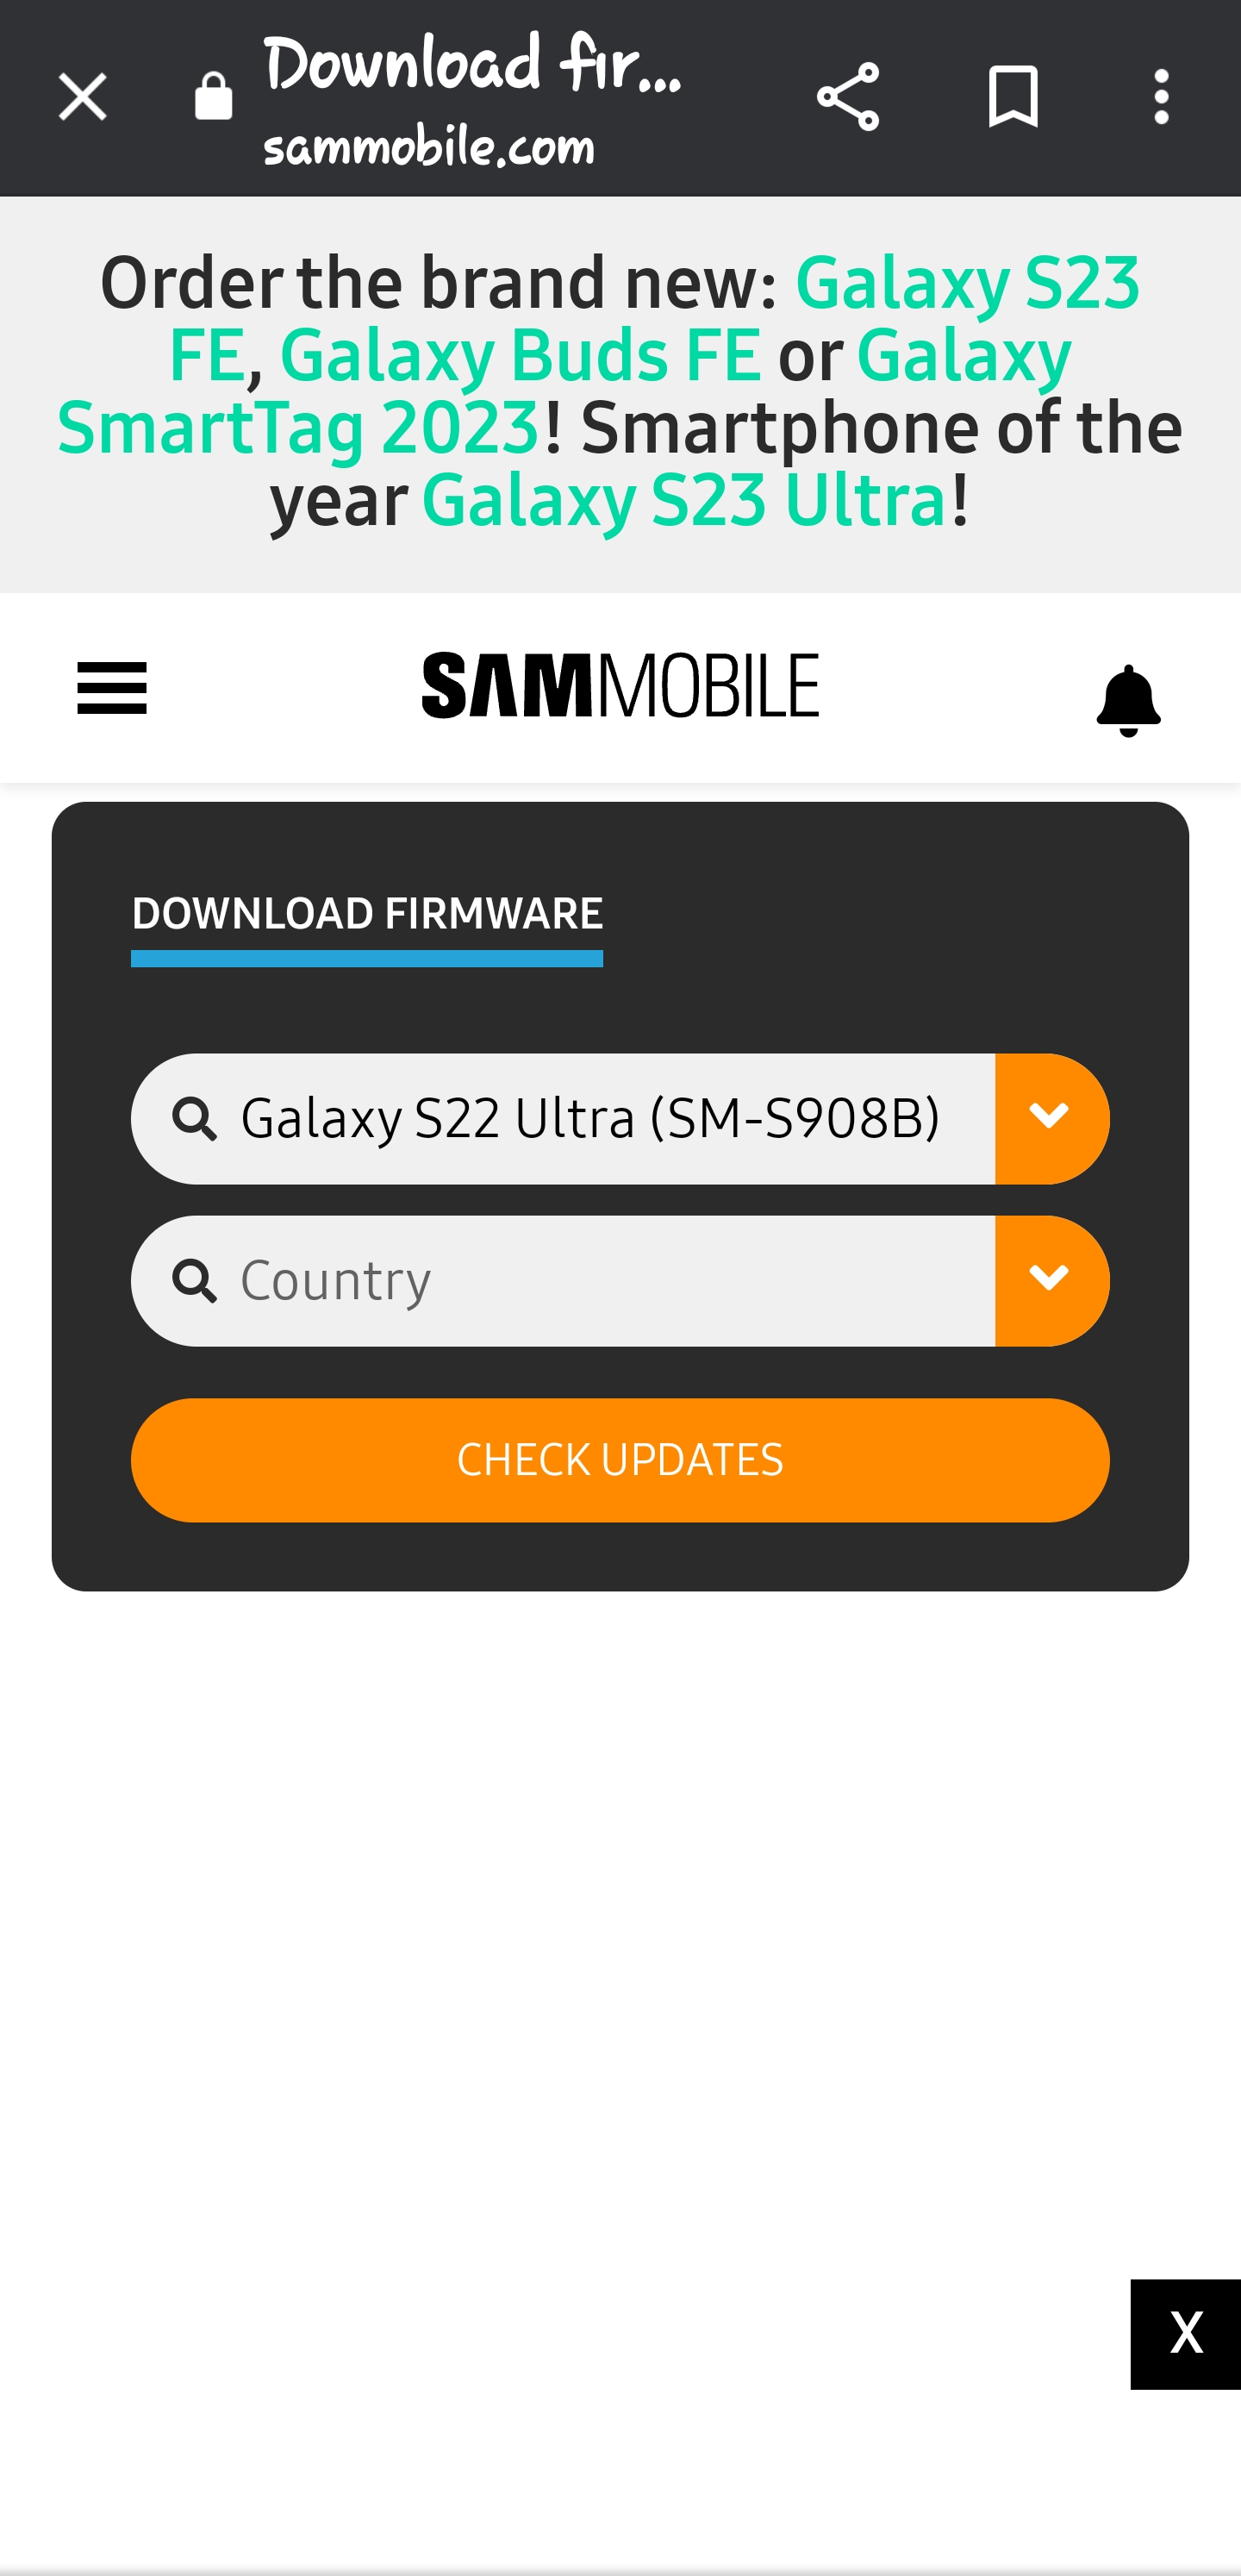 How to Download Samsung firmware From sammobile.com new website